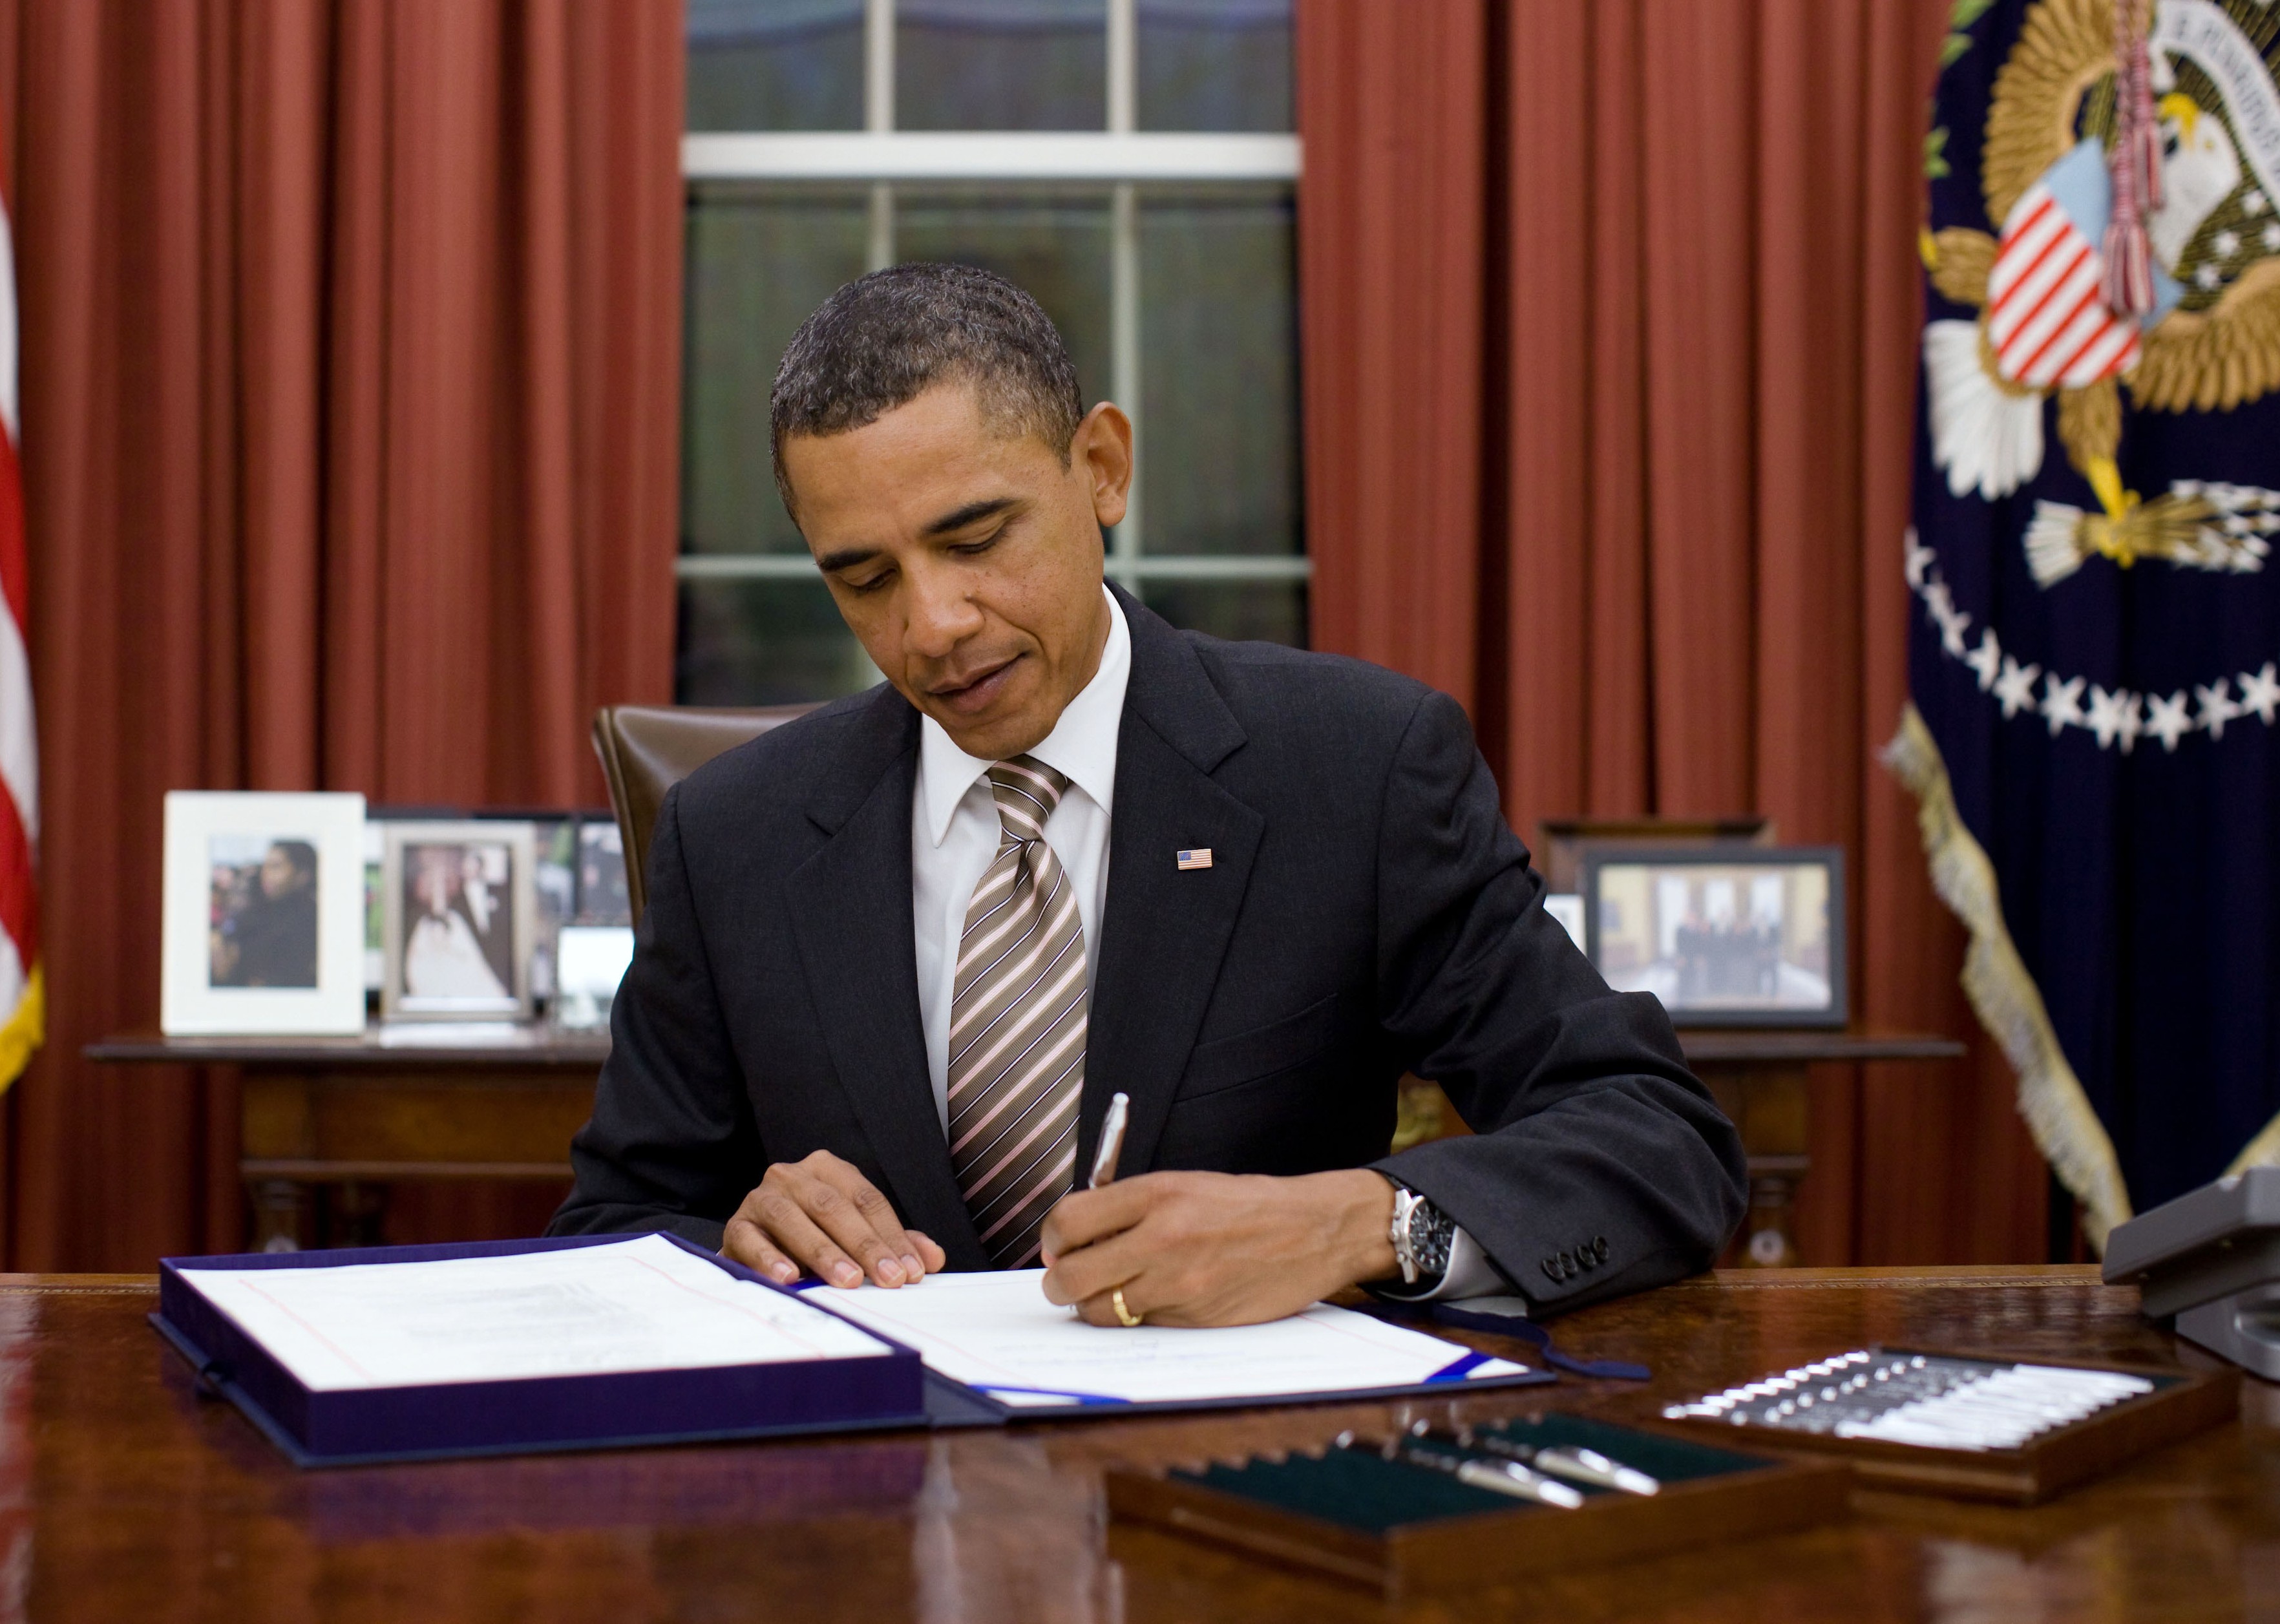 President Obama signed the Global Food Security Act